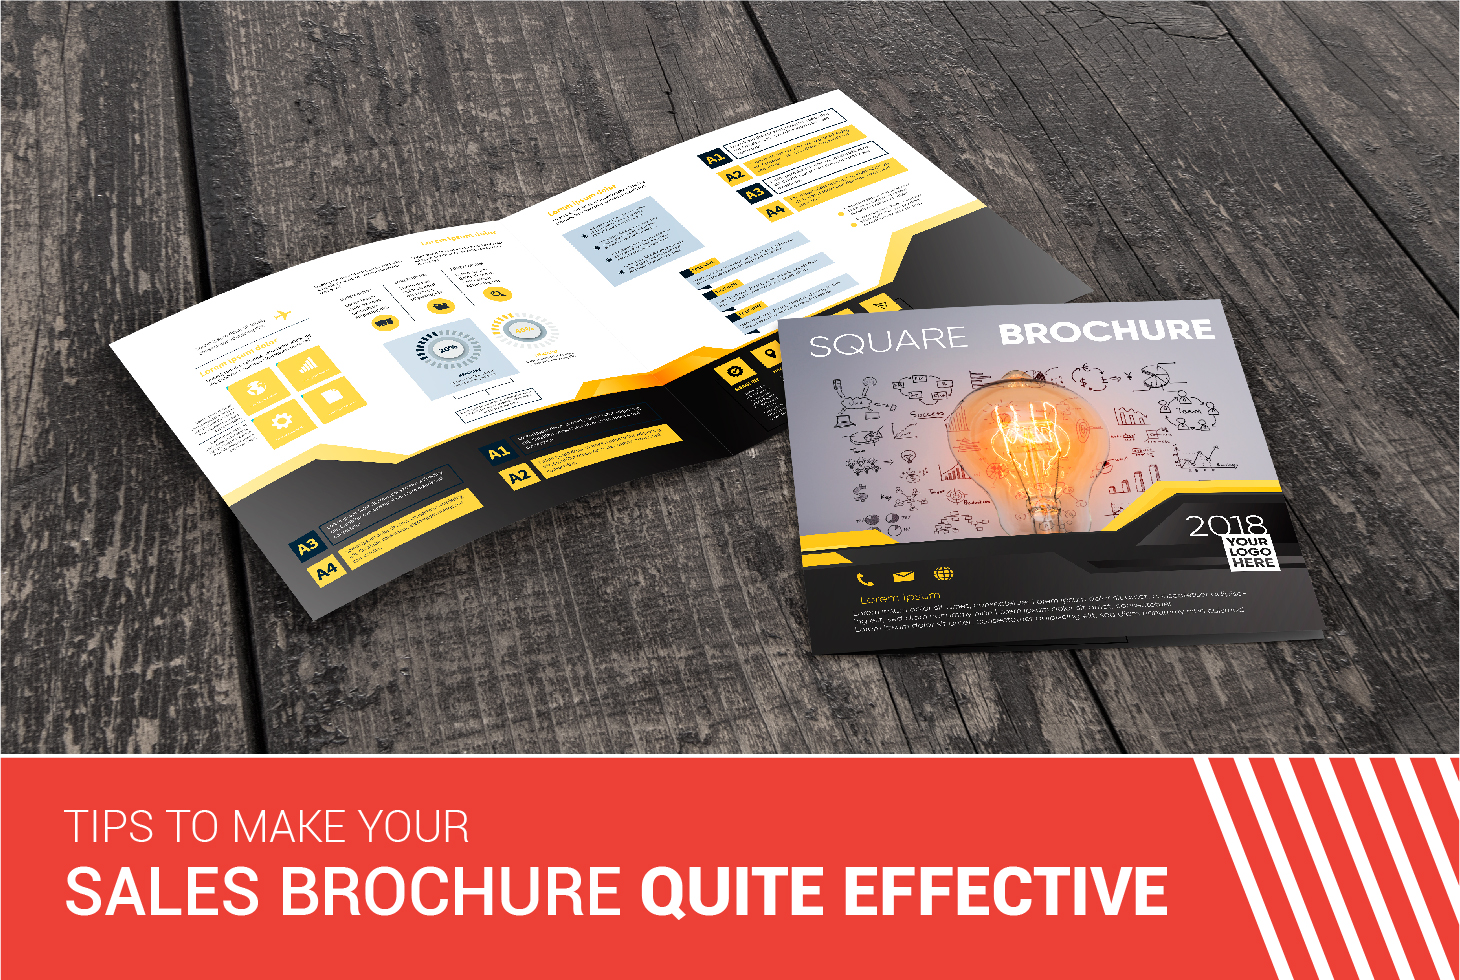 Tips to Make Your Sales Brochure Quite Effective